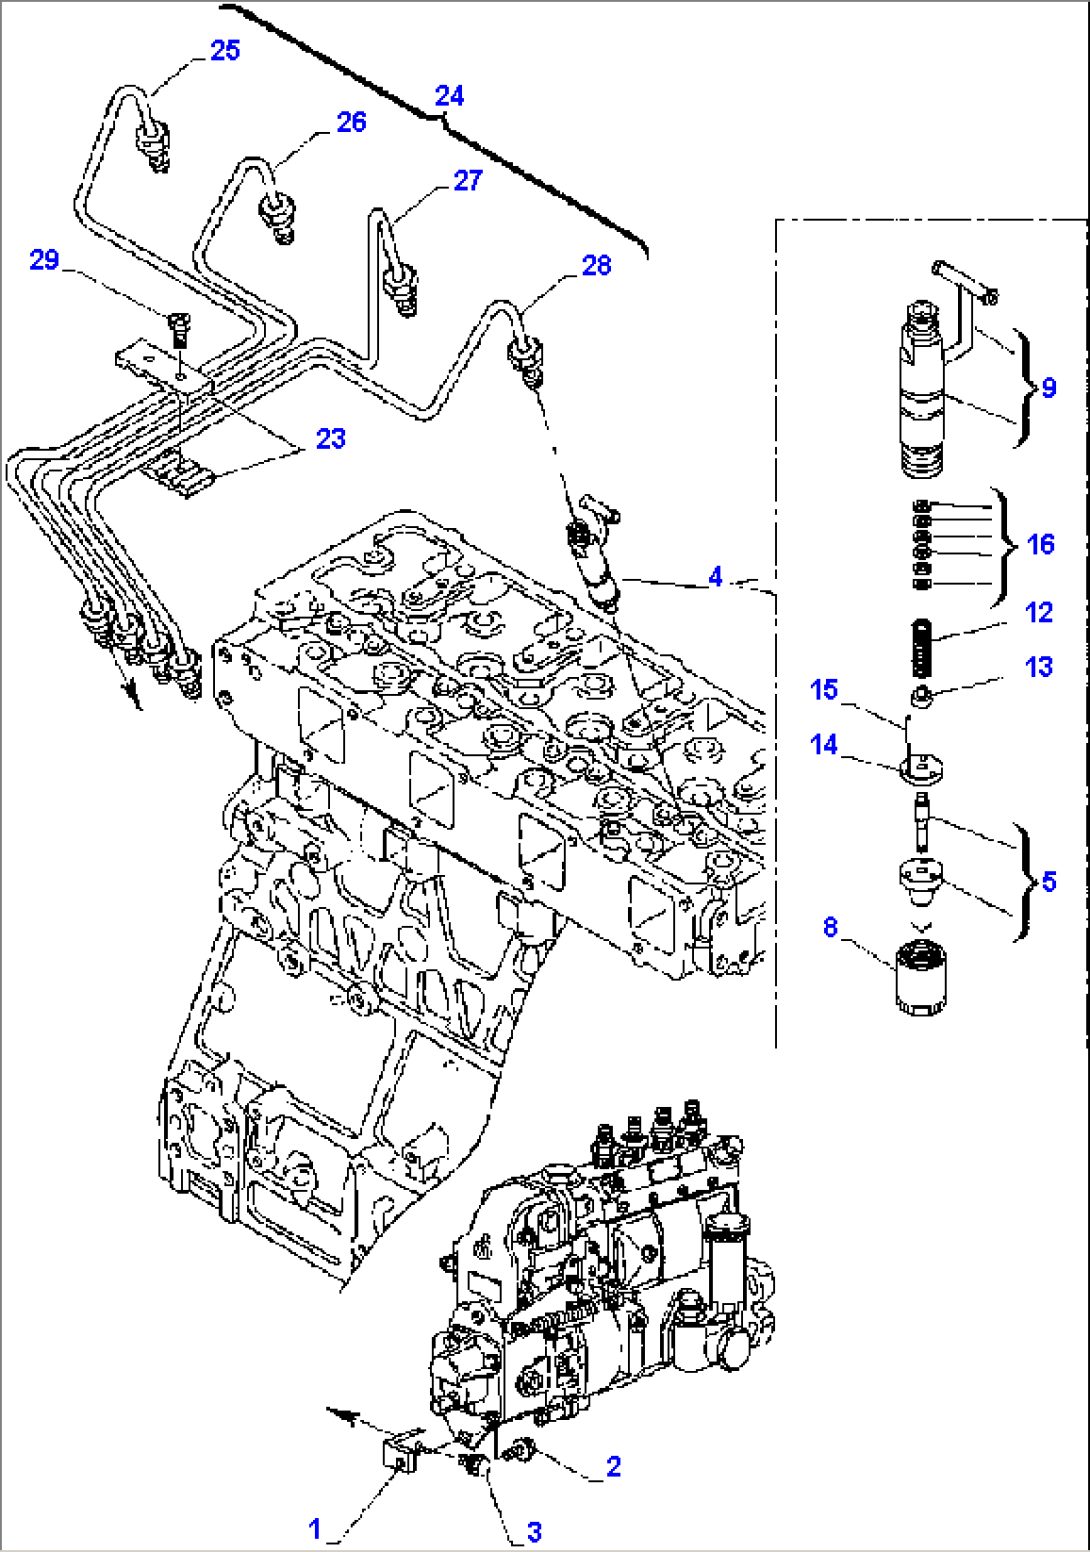 FIG. A0426-02A0 FUEL INJECTION VALVE